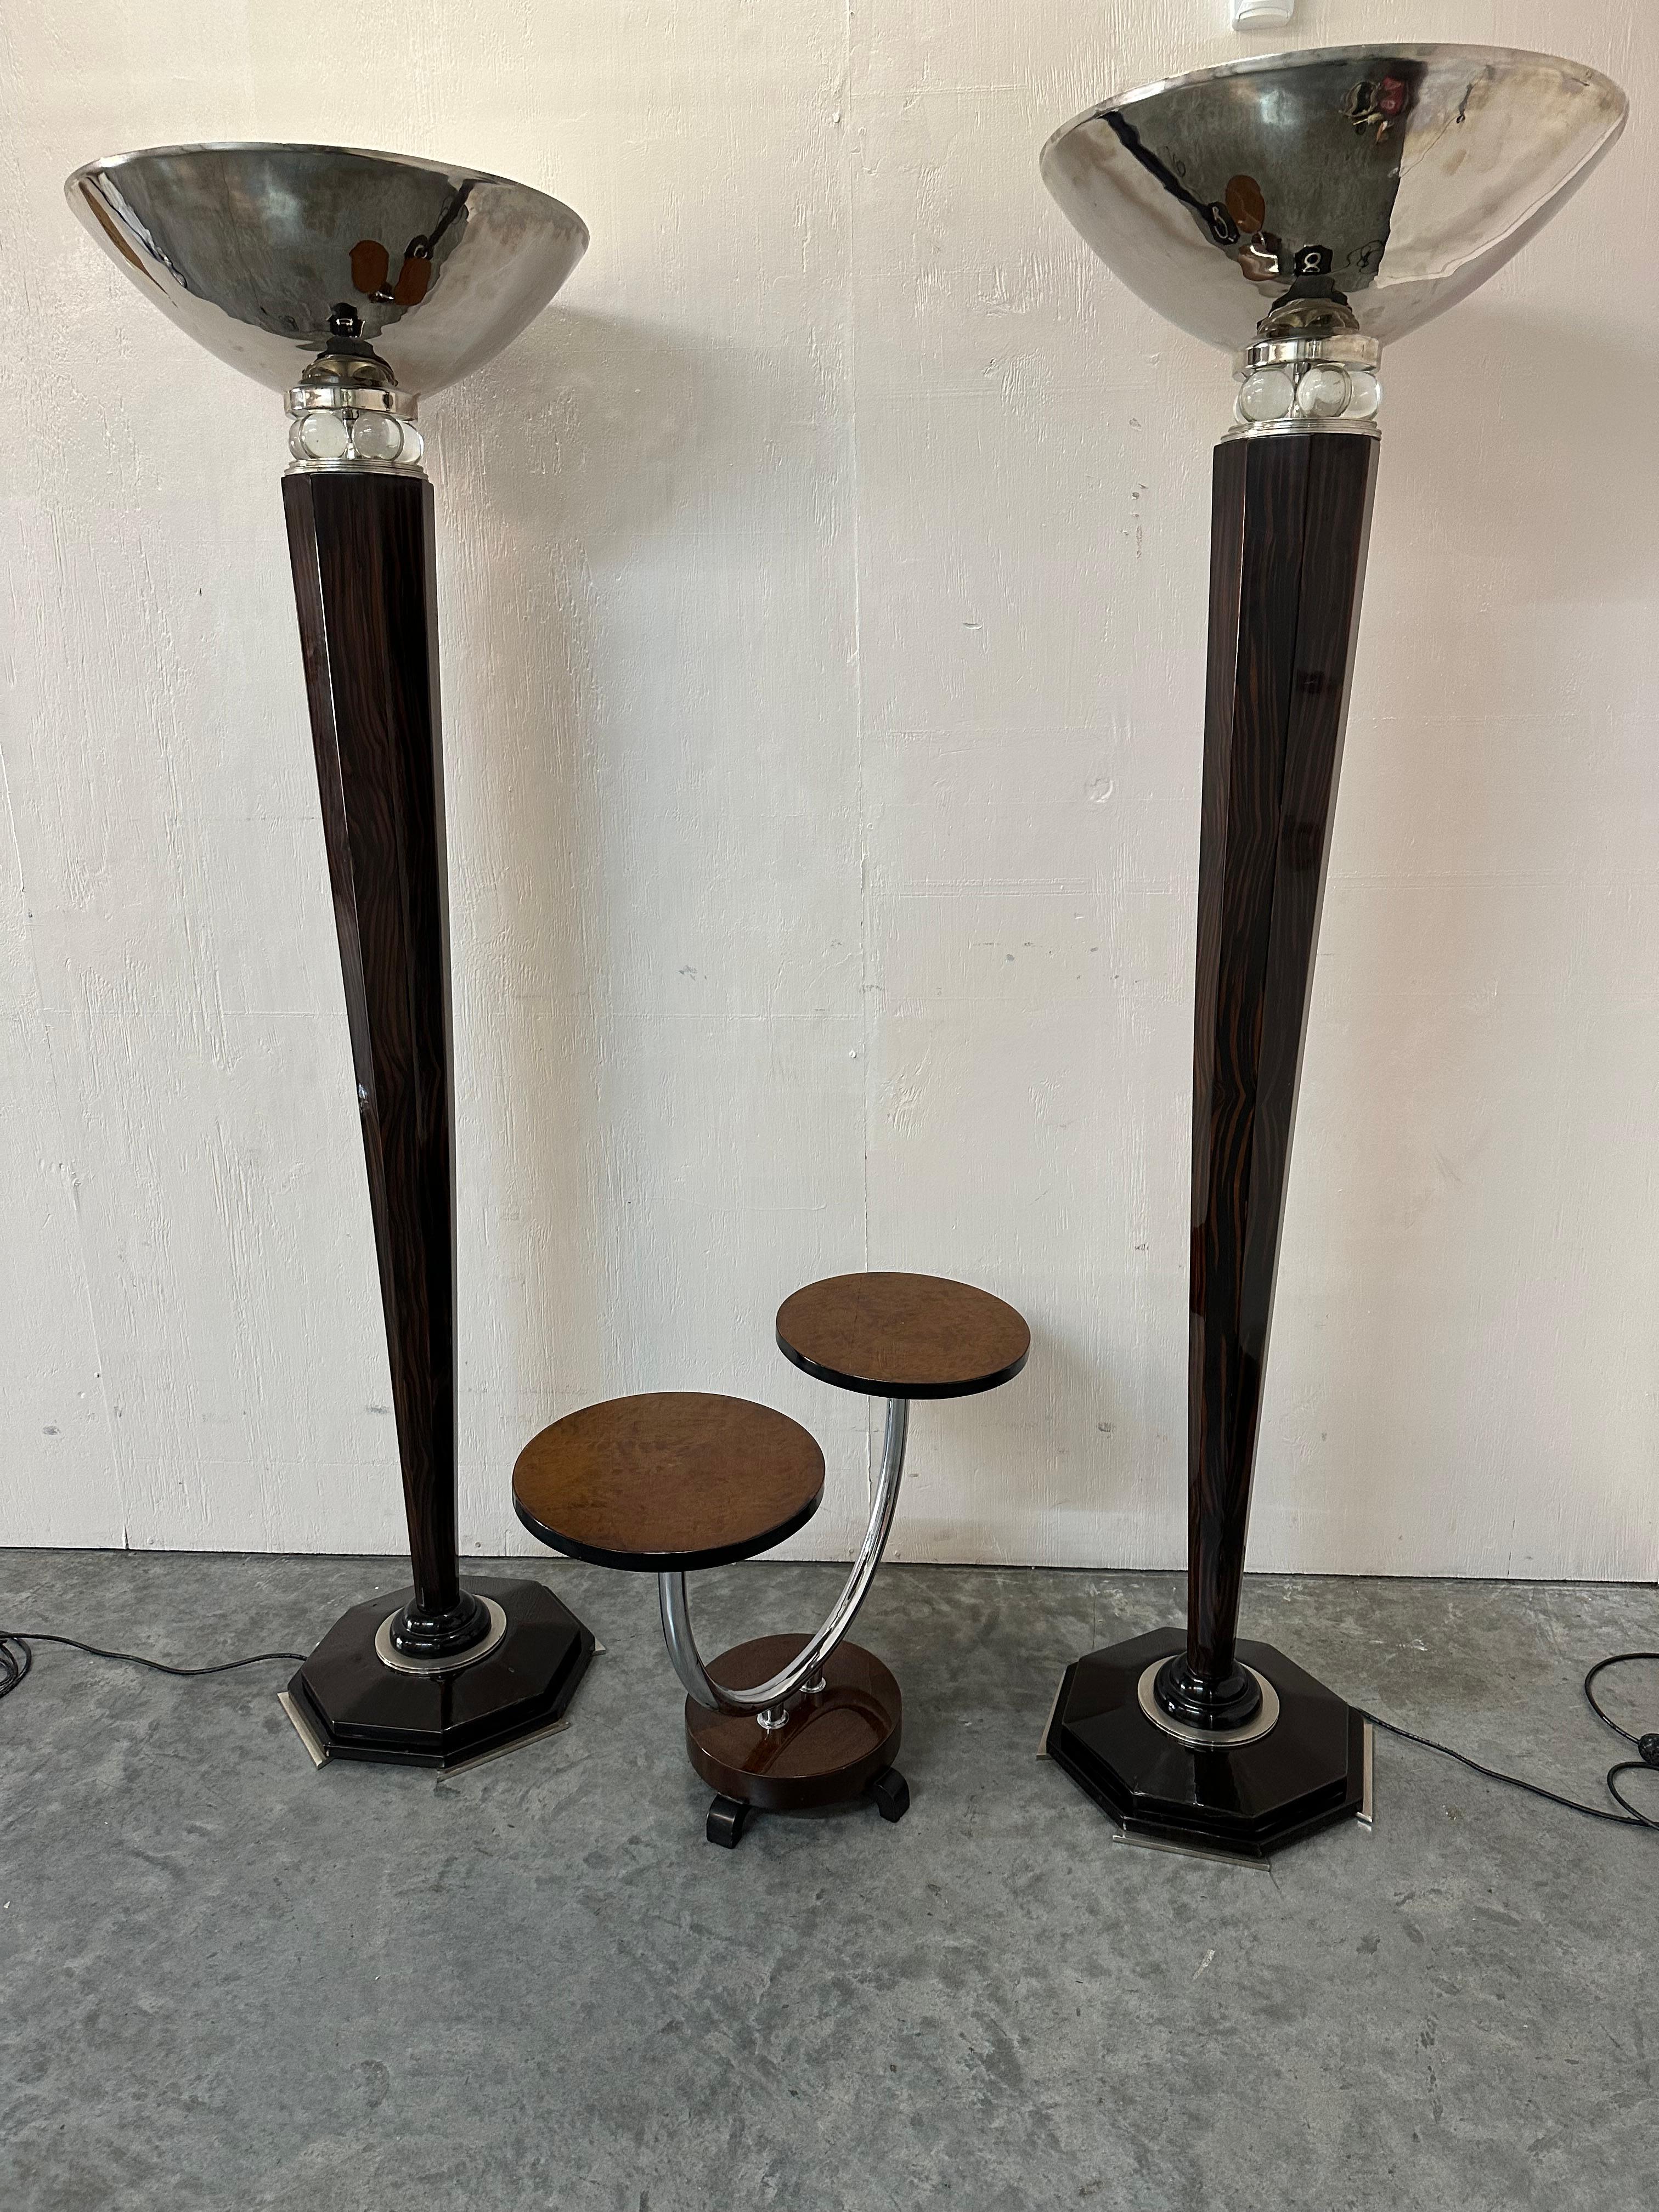 2 Art Deco Floor Lamps, France, Materials: glass, wood and Chrome, 1920 For Sale 1